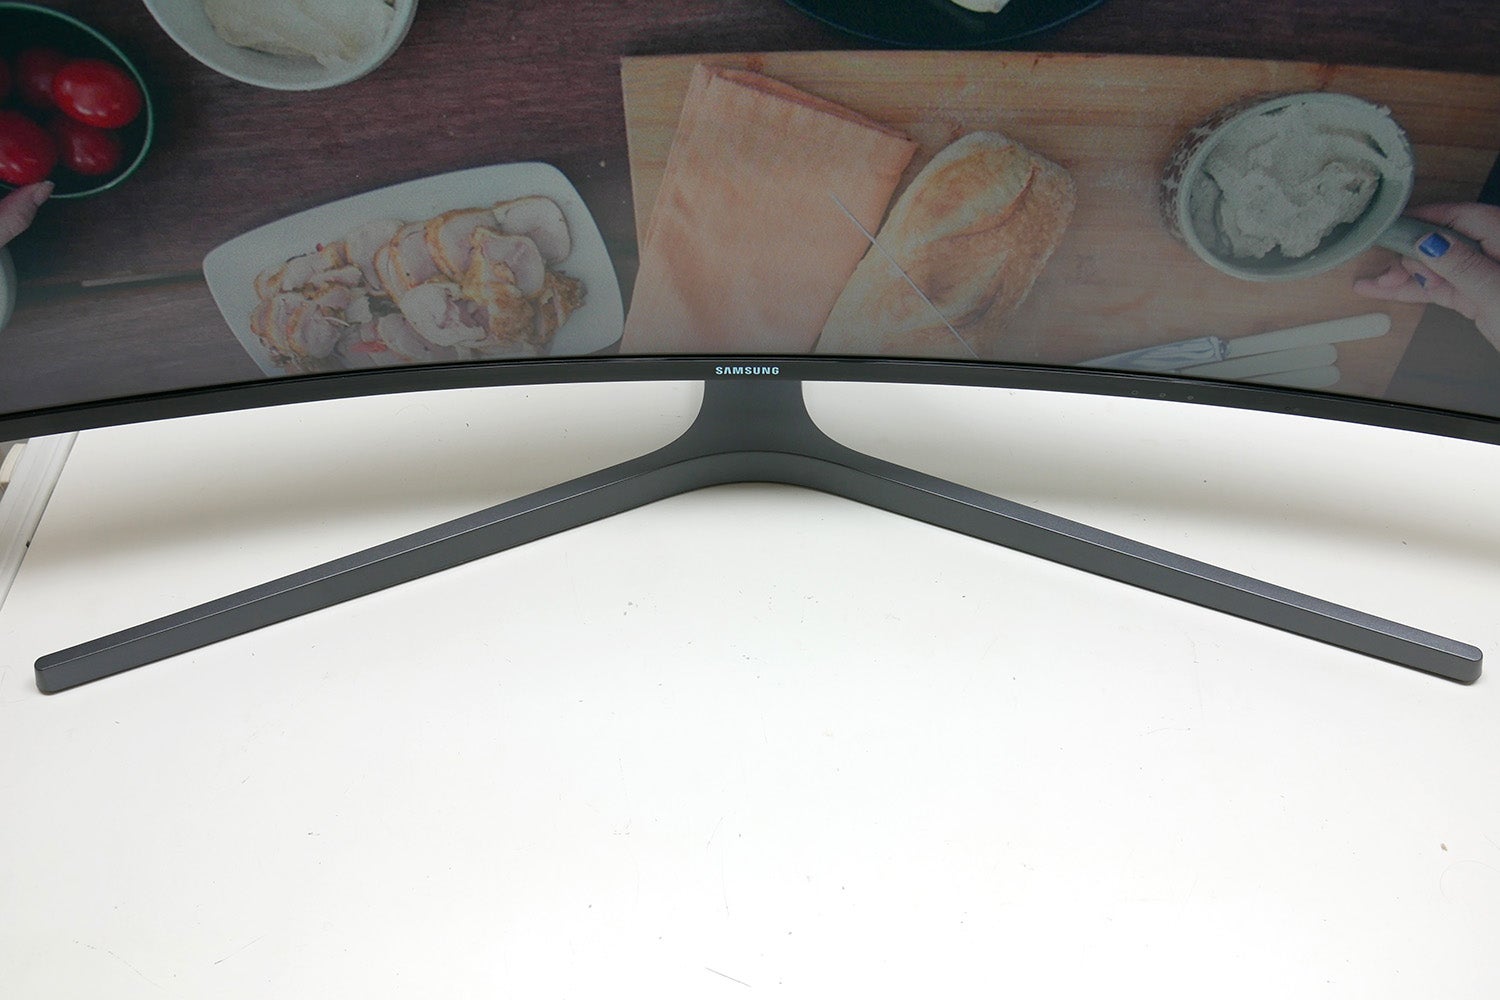 Samsung CHG90 curved monitor on desk displaying content.